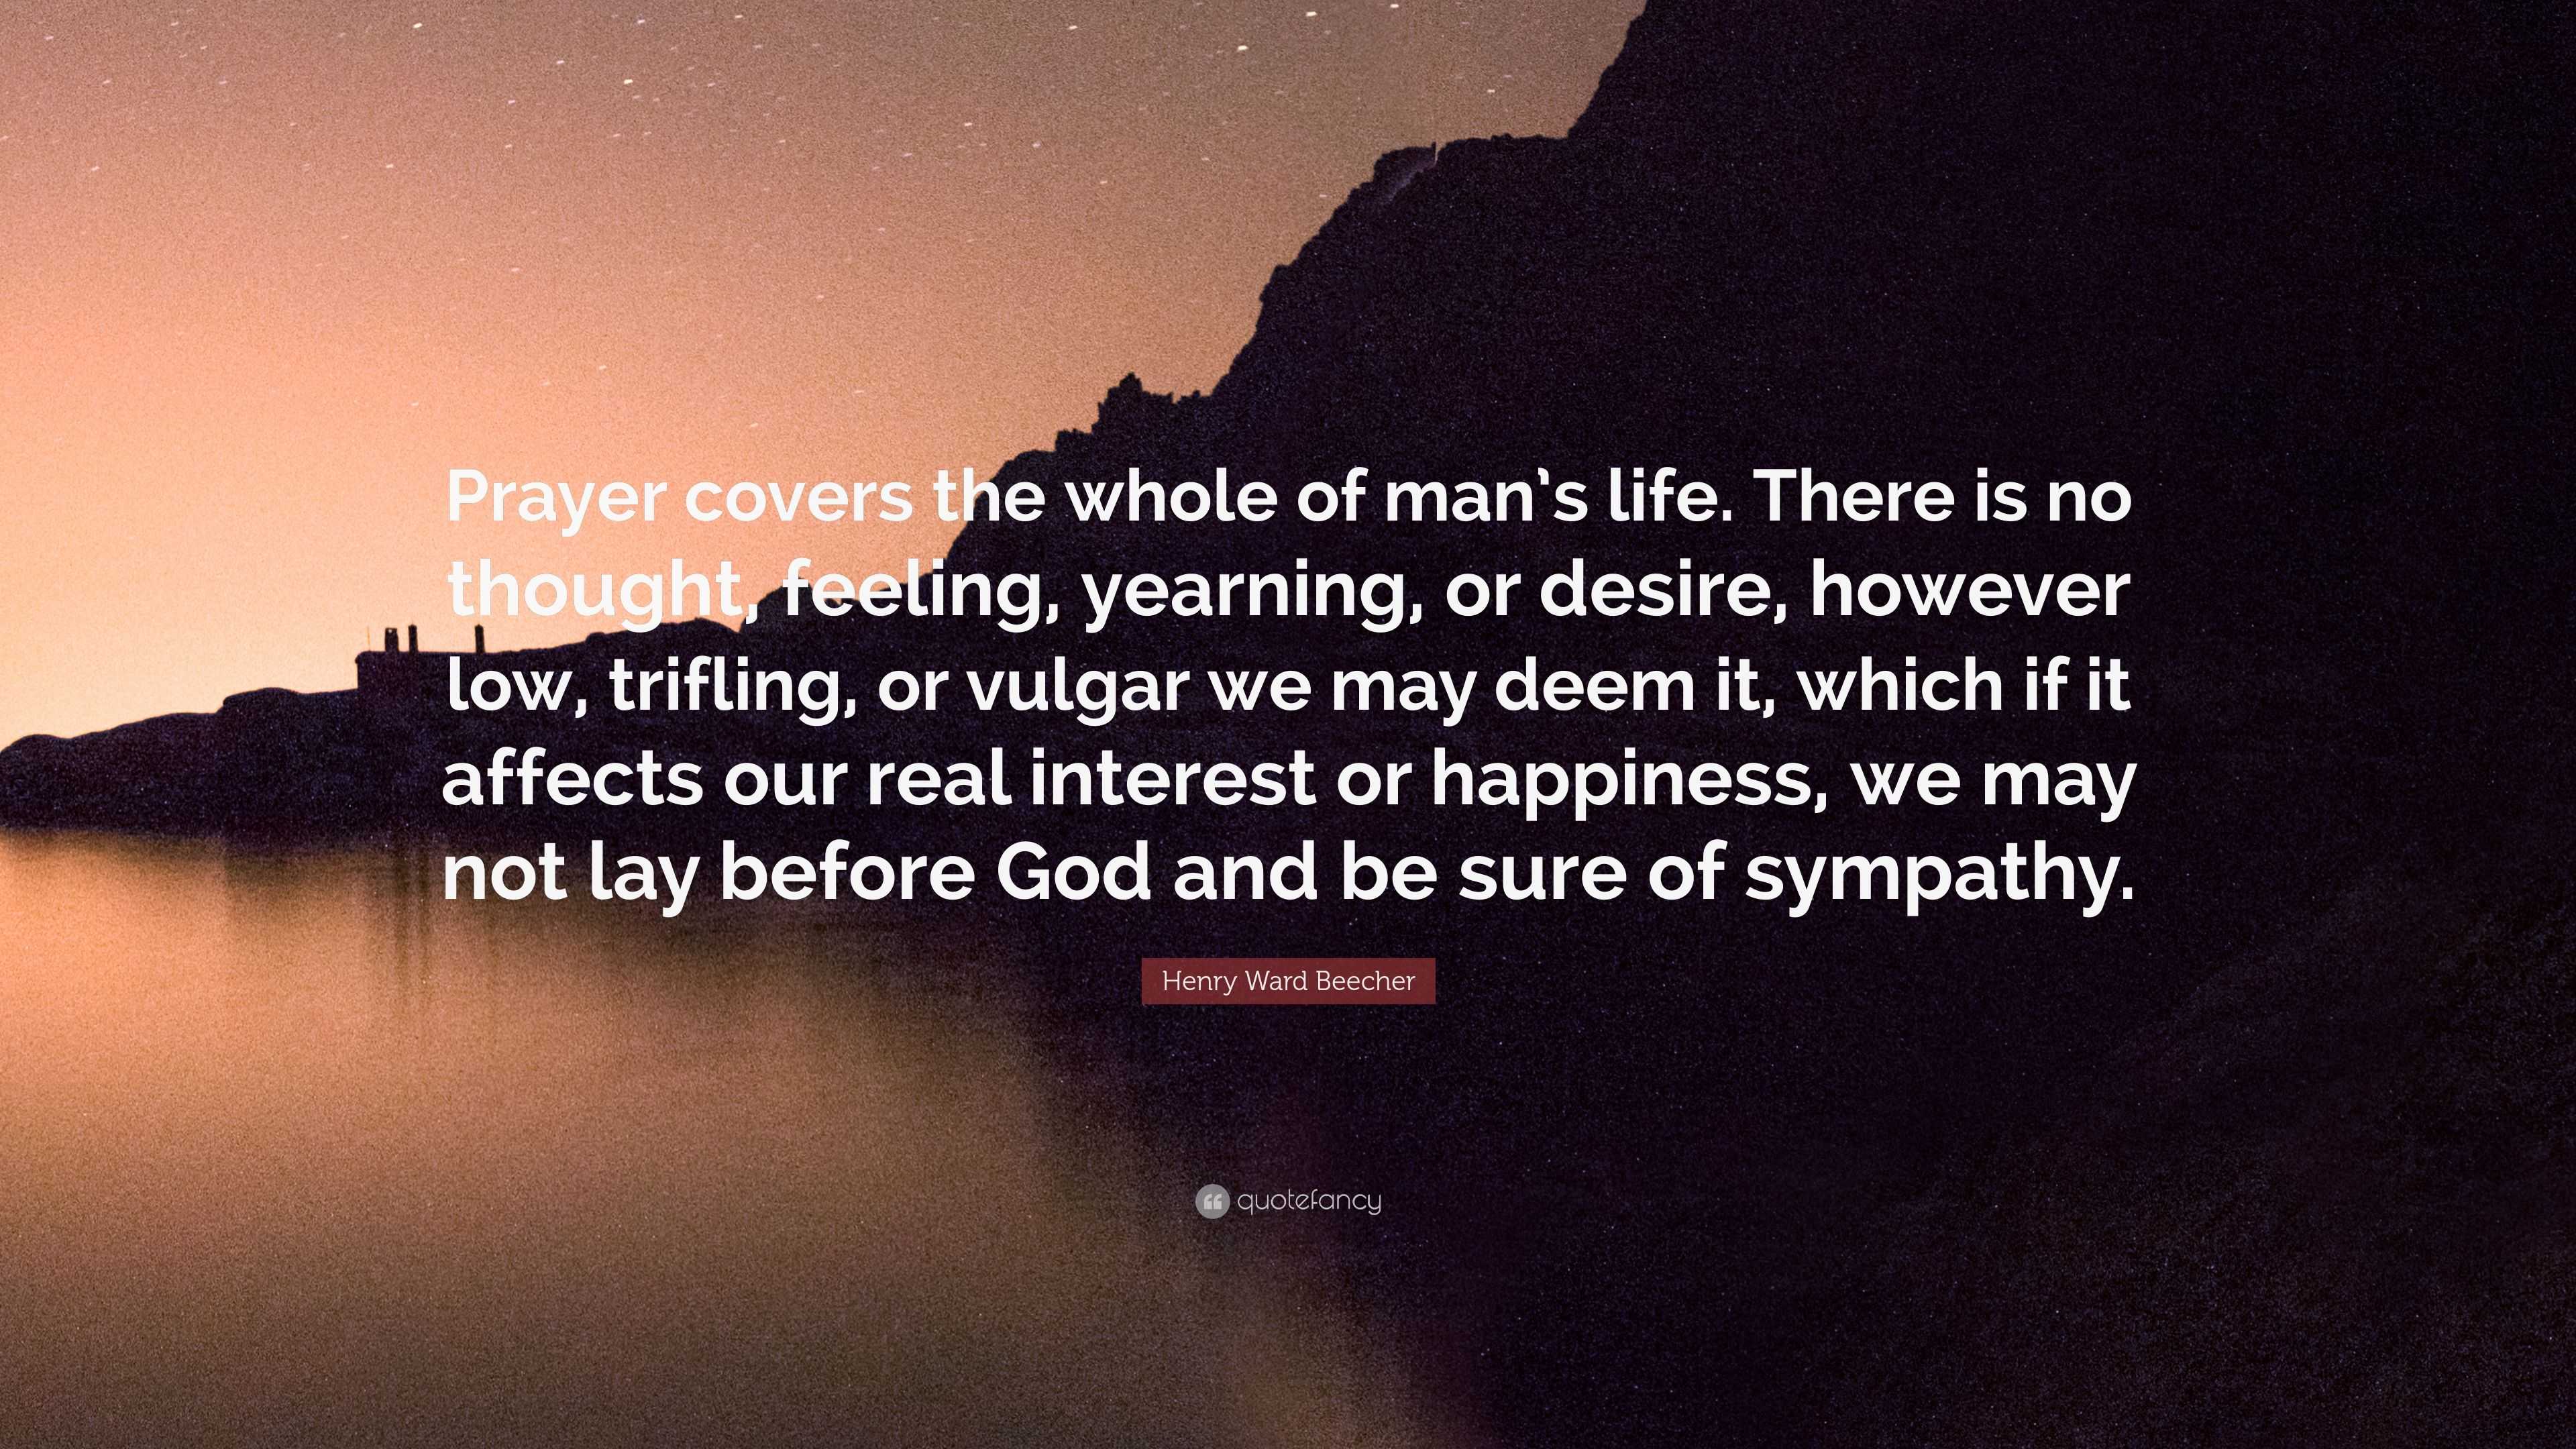 Henry Ward Beecher quote: I used to think the Lord's Prayer was a